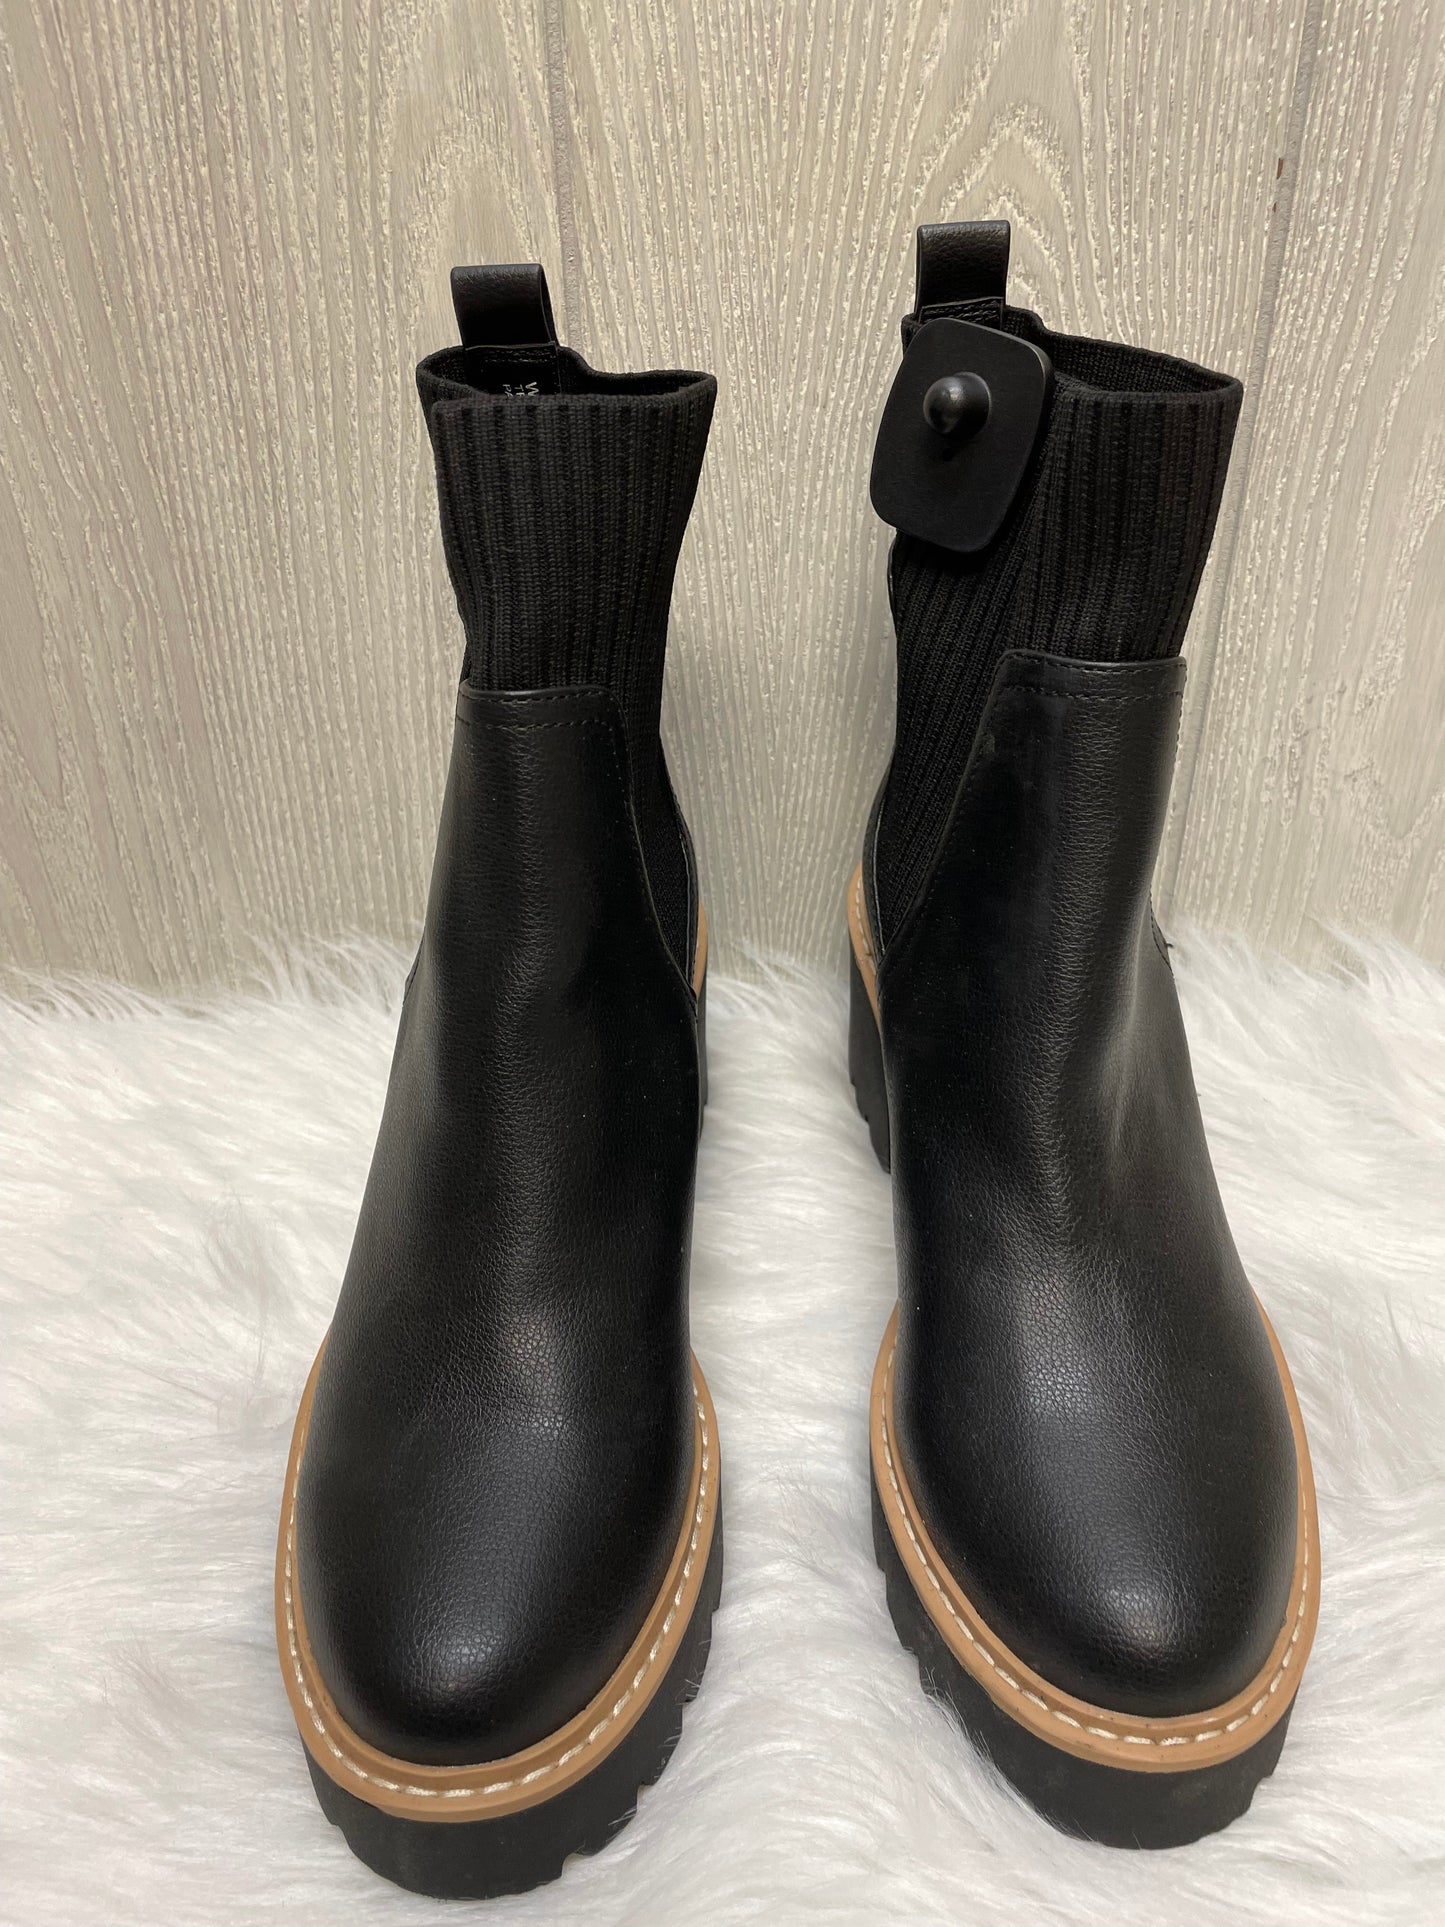 Black Boots Ankle Heels Dolce Vita, Size 7.5